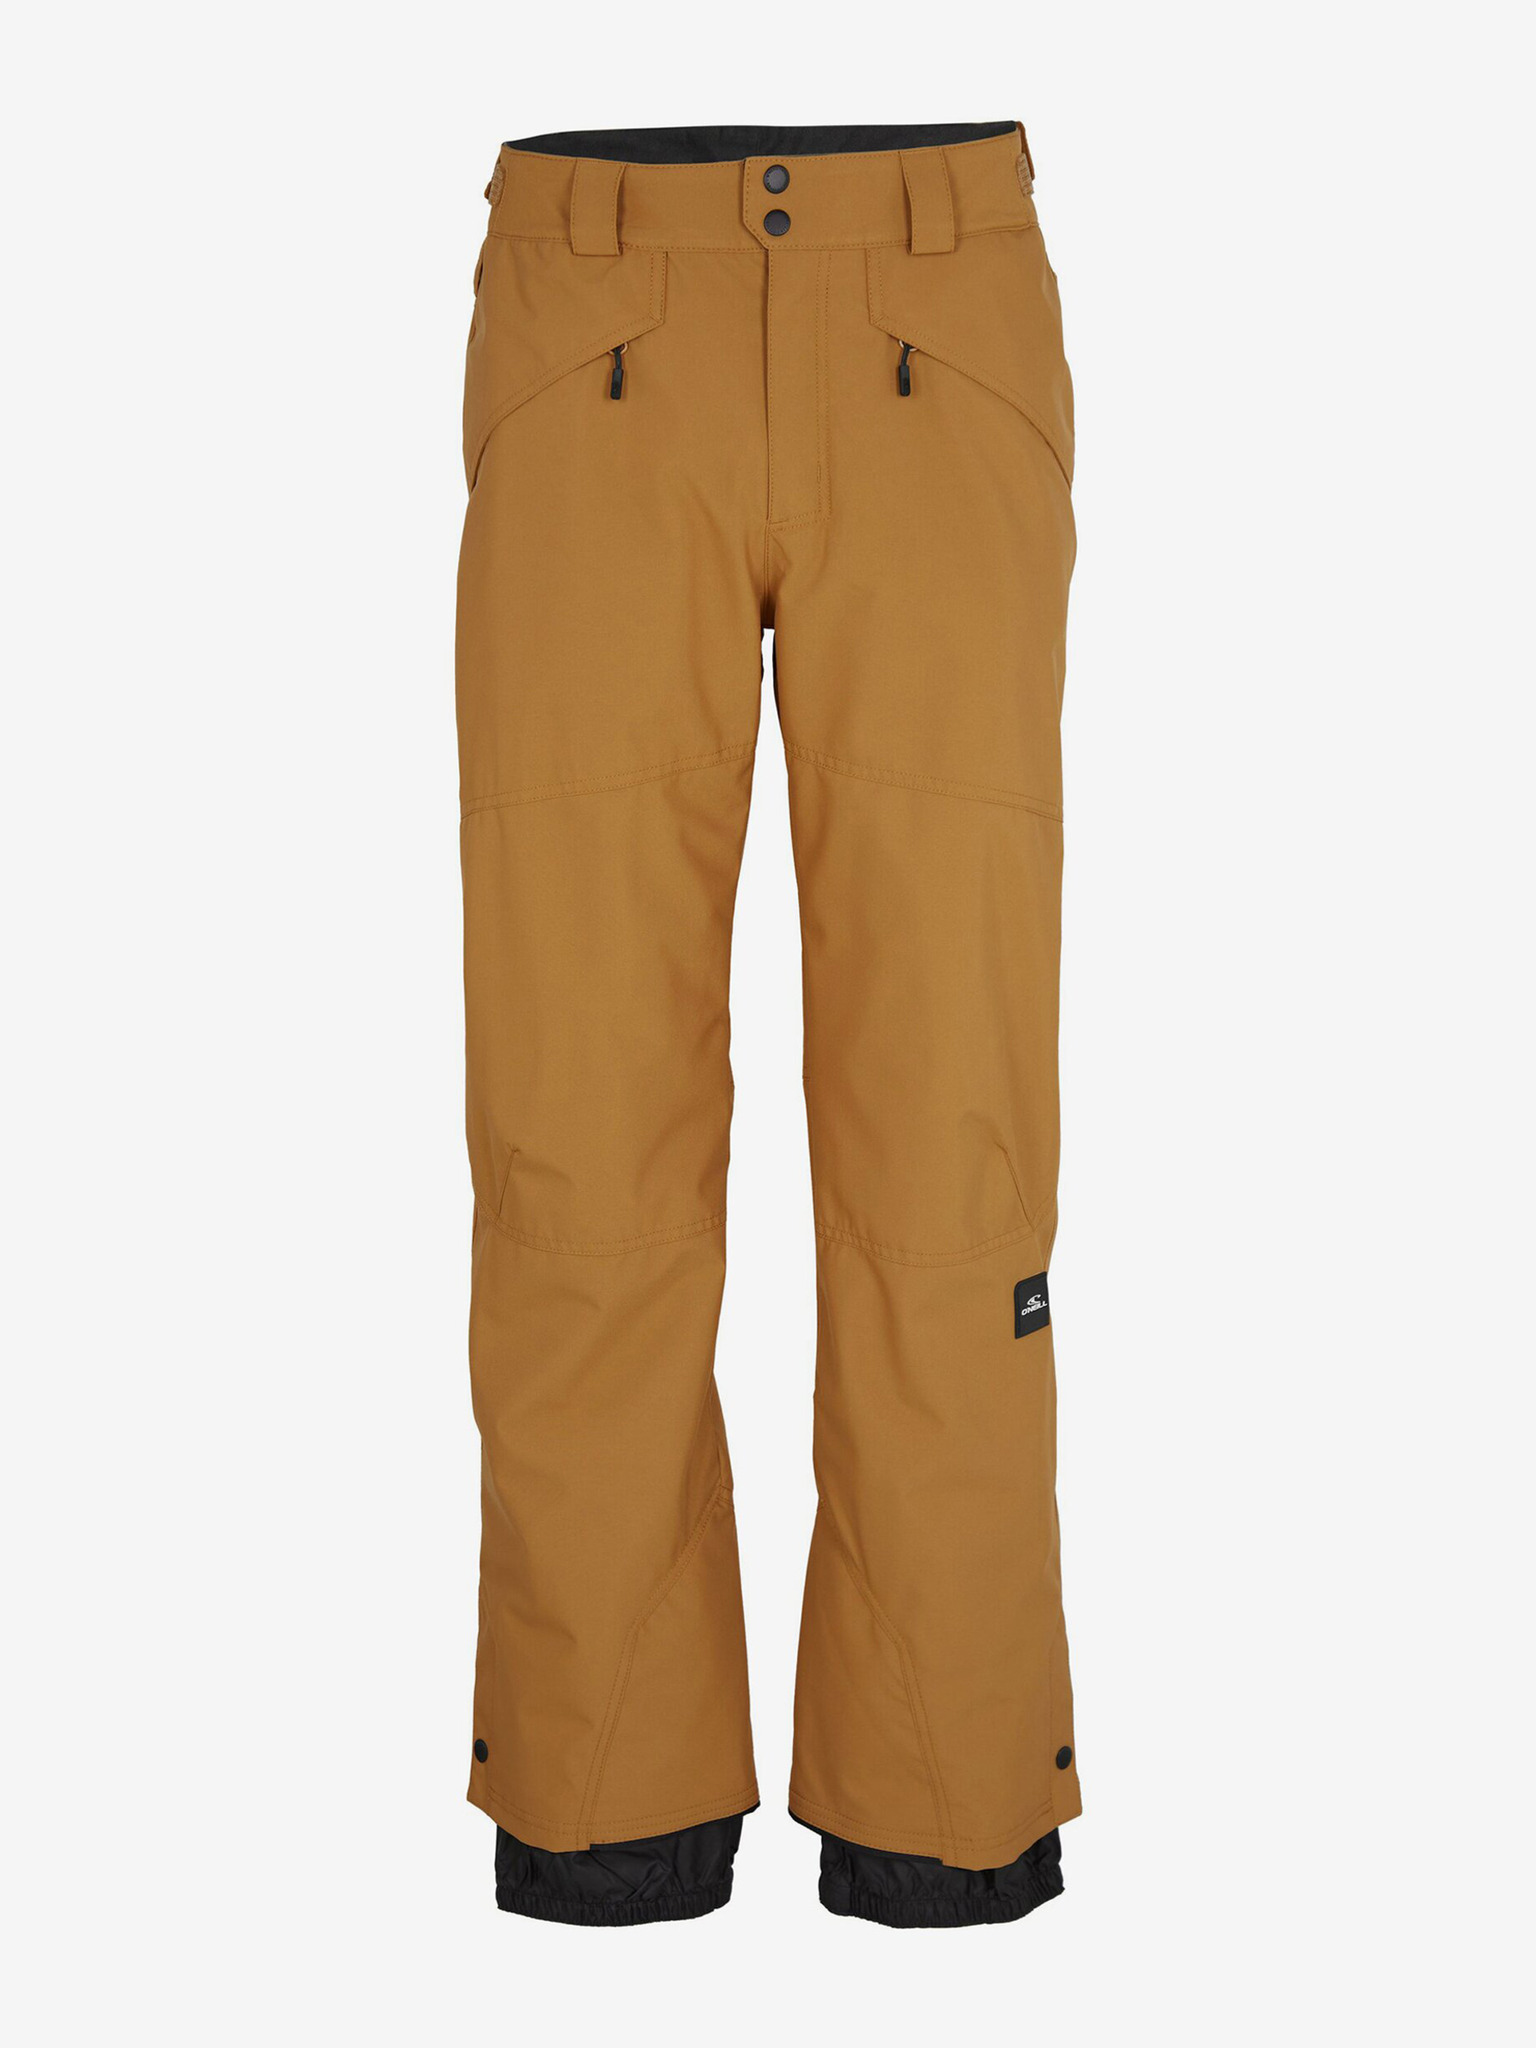 Under Armour - Tac Patrol Pant II Trousers